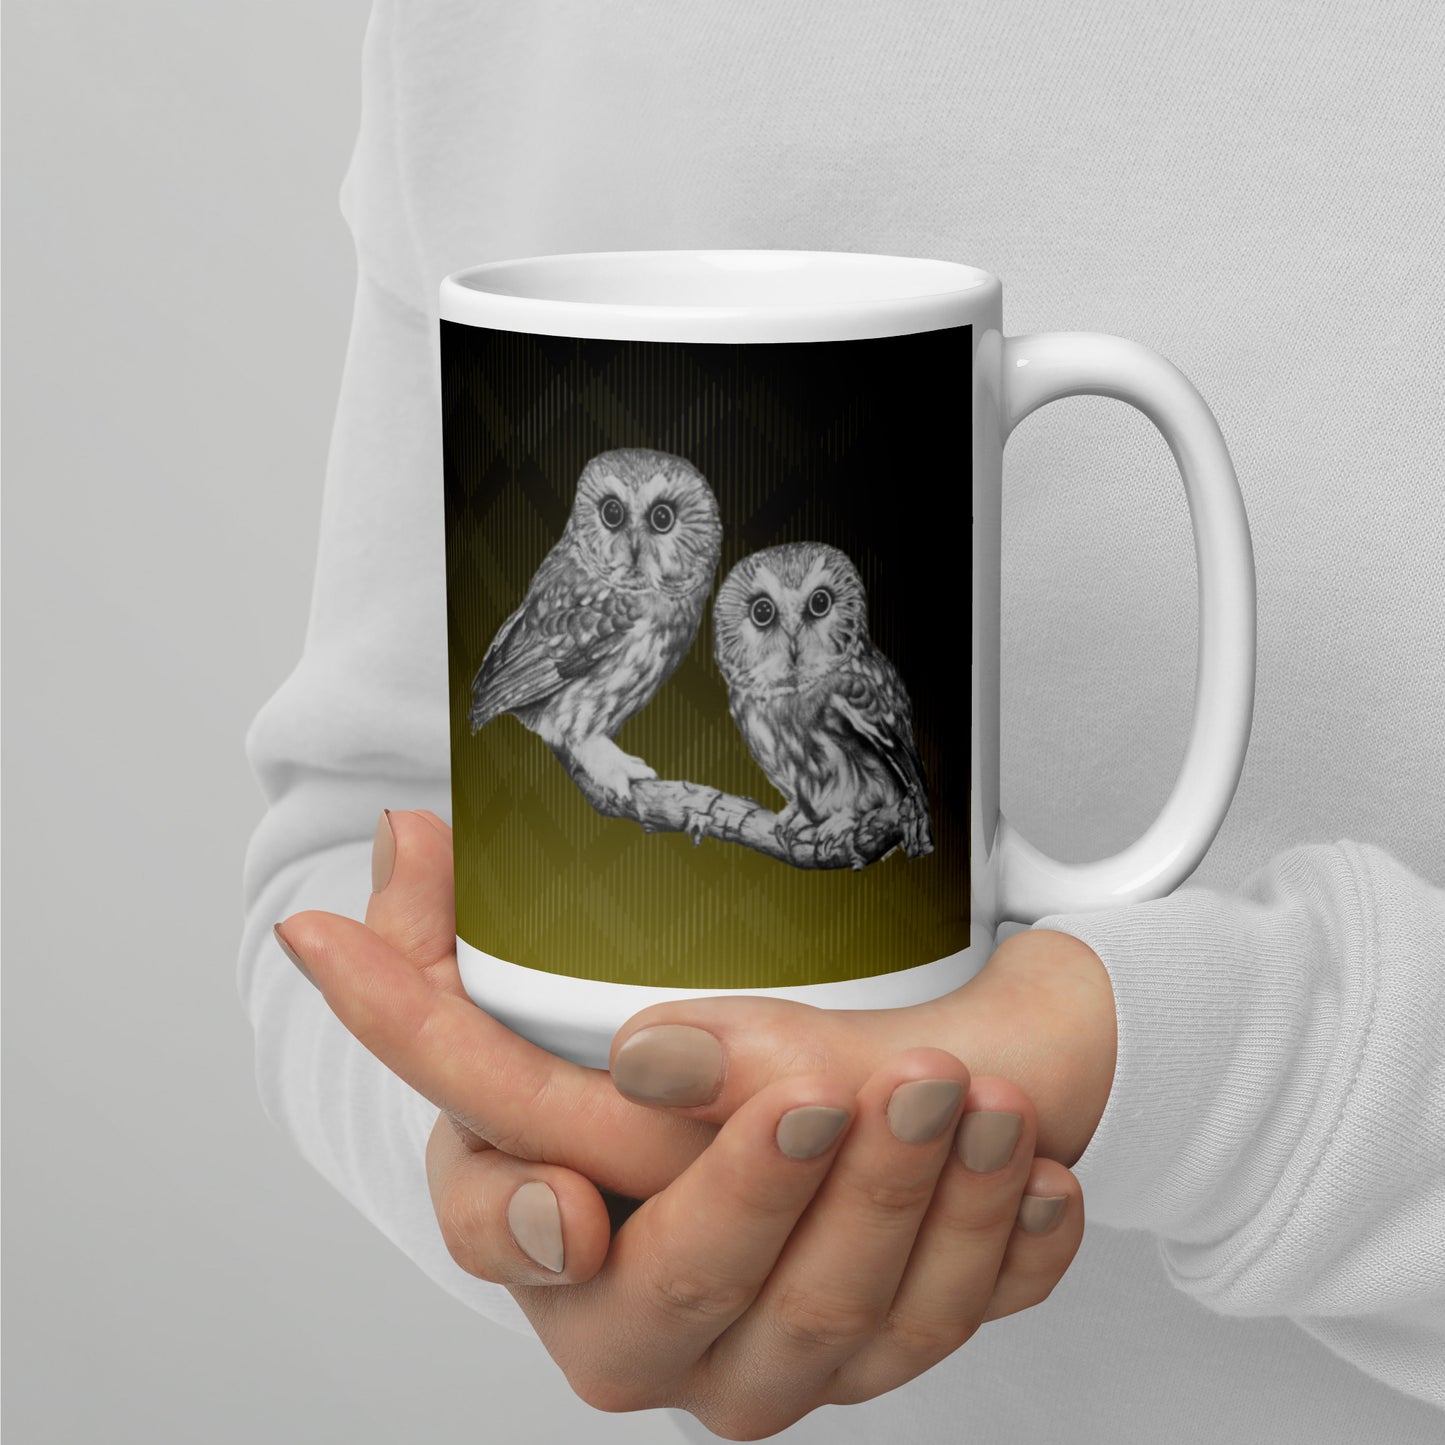 The "Owl White Glossy Mug" is of two owls sitting on a branch with a "Who's That" look, drawn with a graphite pencil on Hammermill Bond paper.